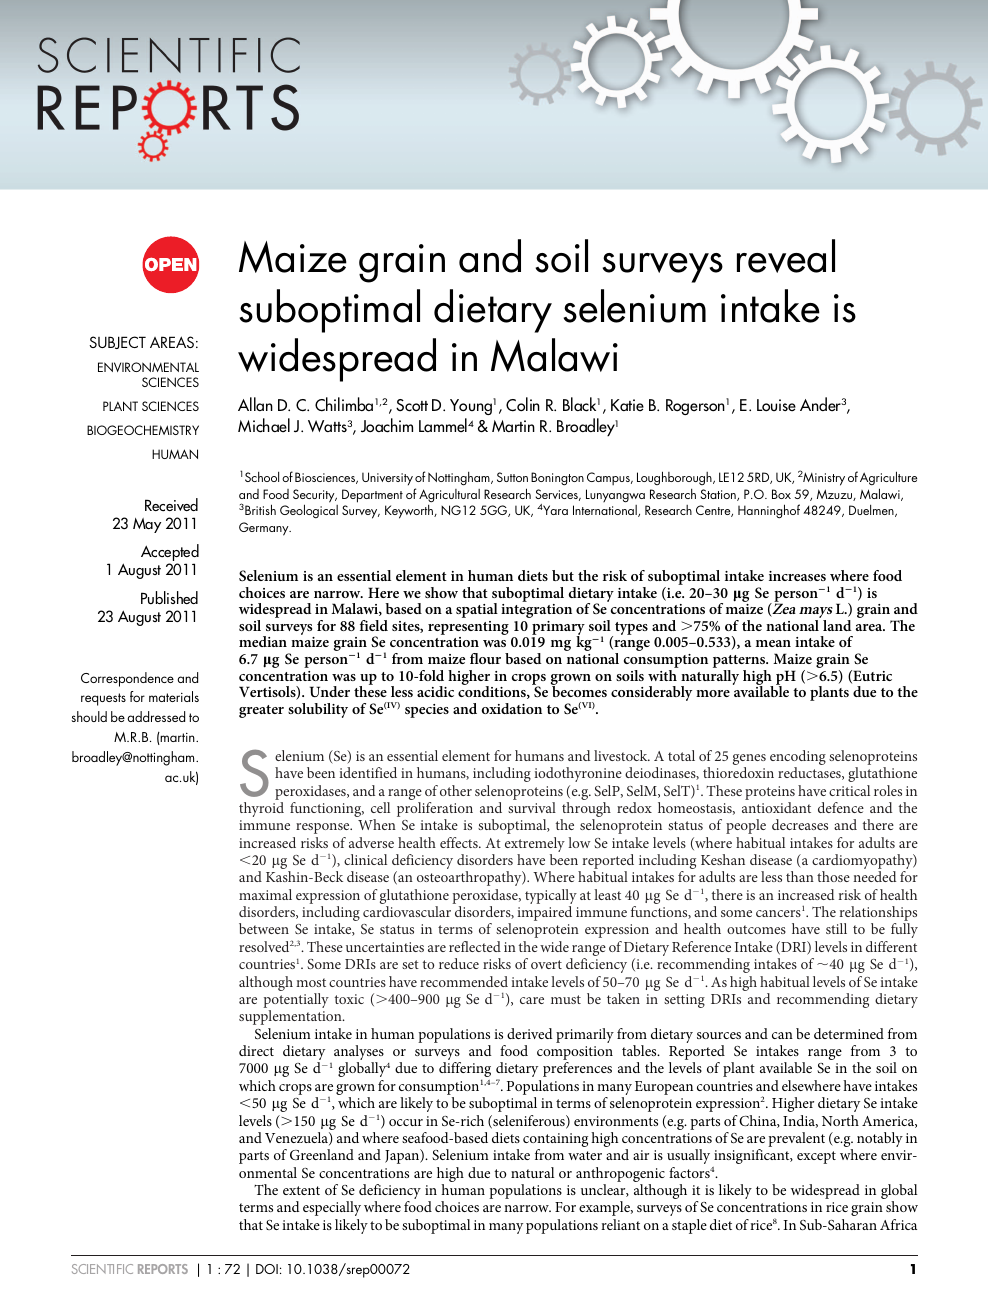 Maize Grain And Soil Surveys Reveal Suboptimal Dietary Selenium Intake Is Widespread In Malawi Topic Of Research Paper In Chemical Sciences Download Scholarly Article Pdf And Read For Free On Cyberleninka